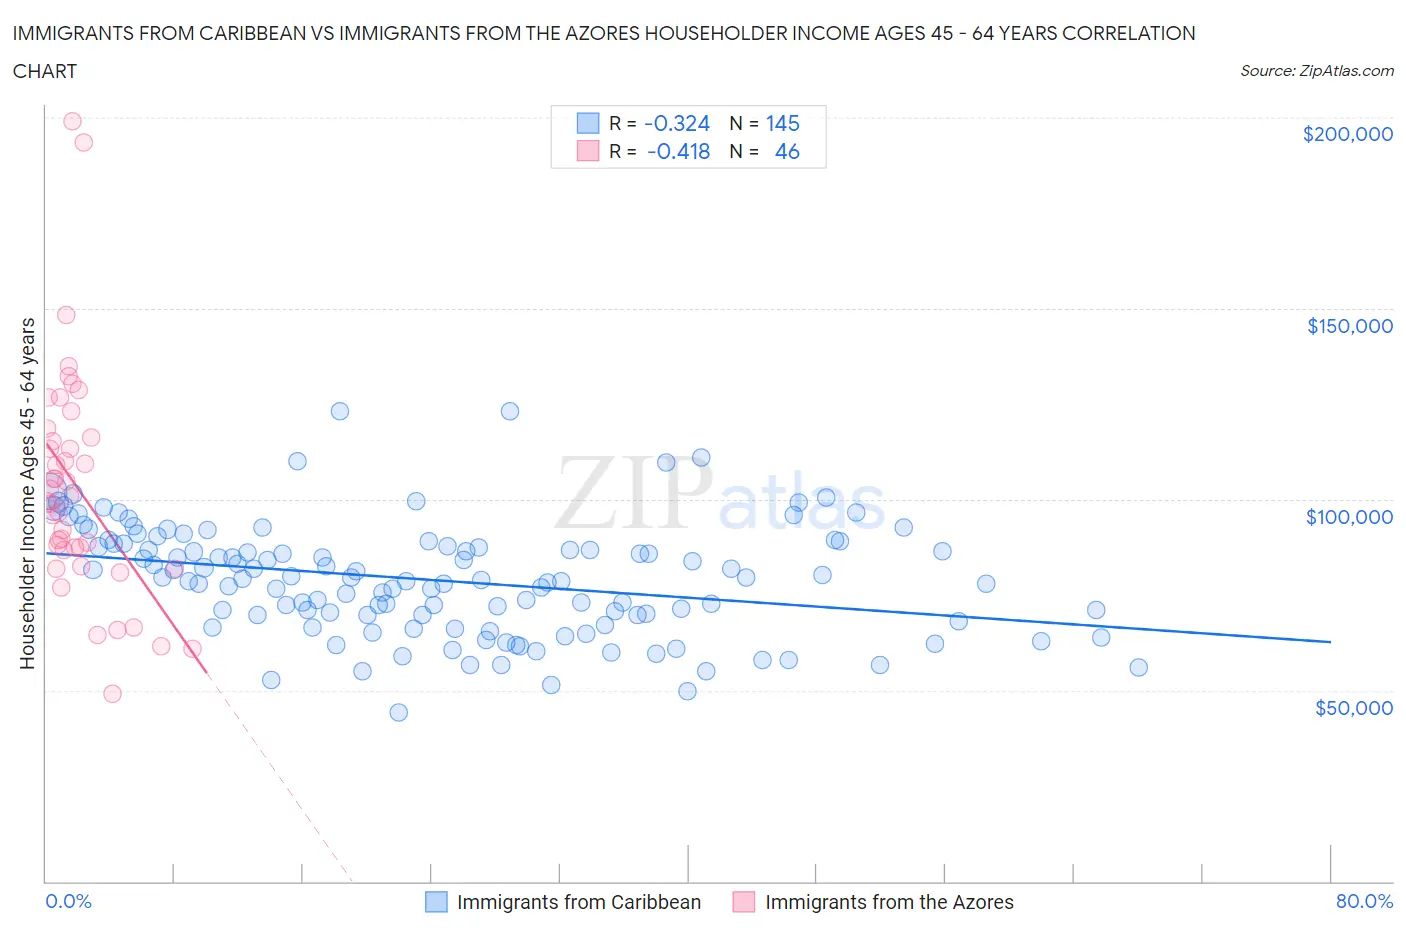 Immigrants from Caribbean vs Immigrants from the Azores Householder Income Ages 45 - 64 years